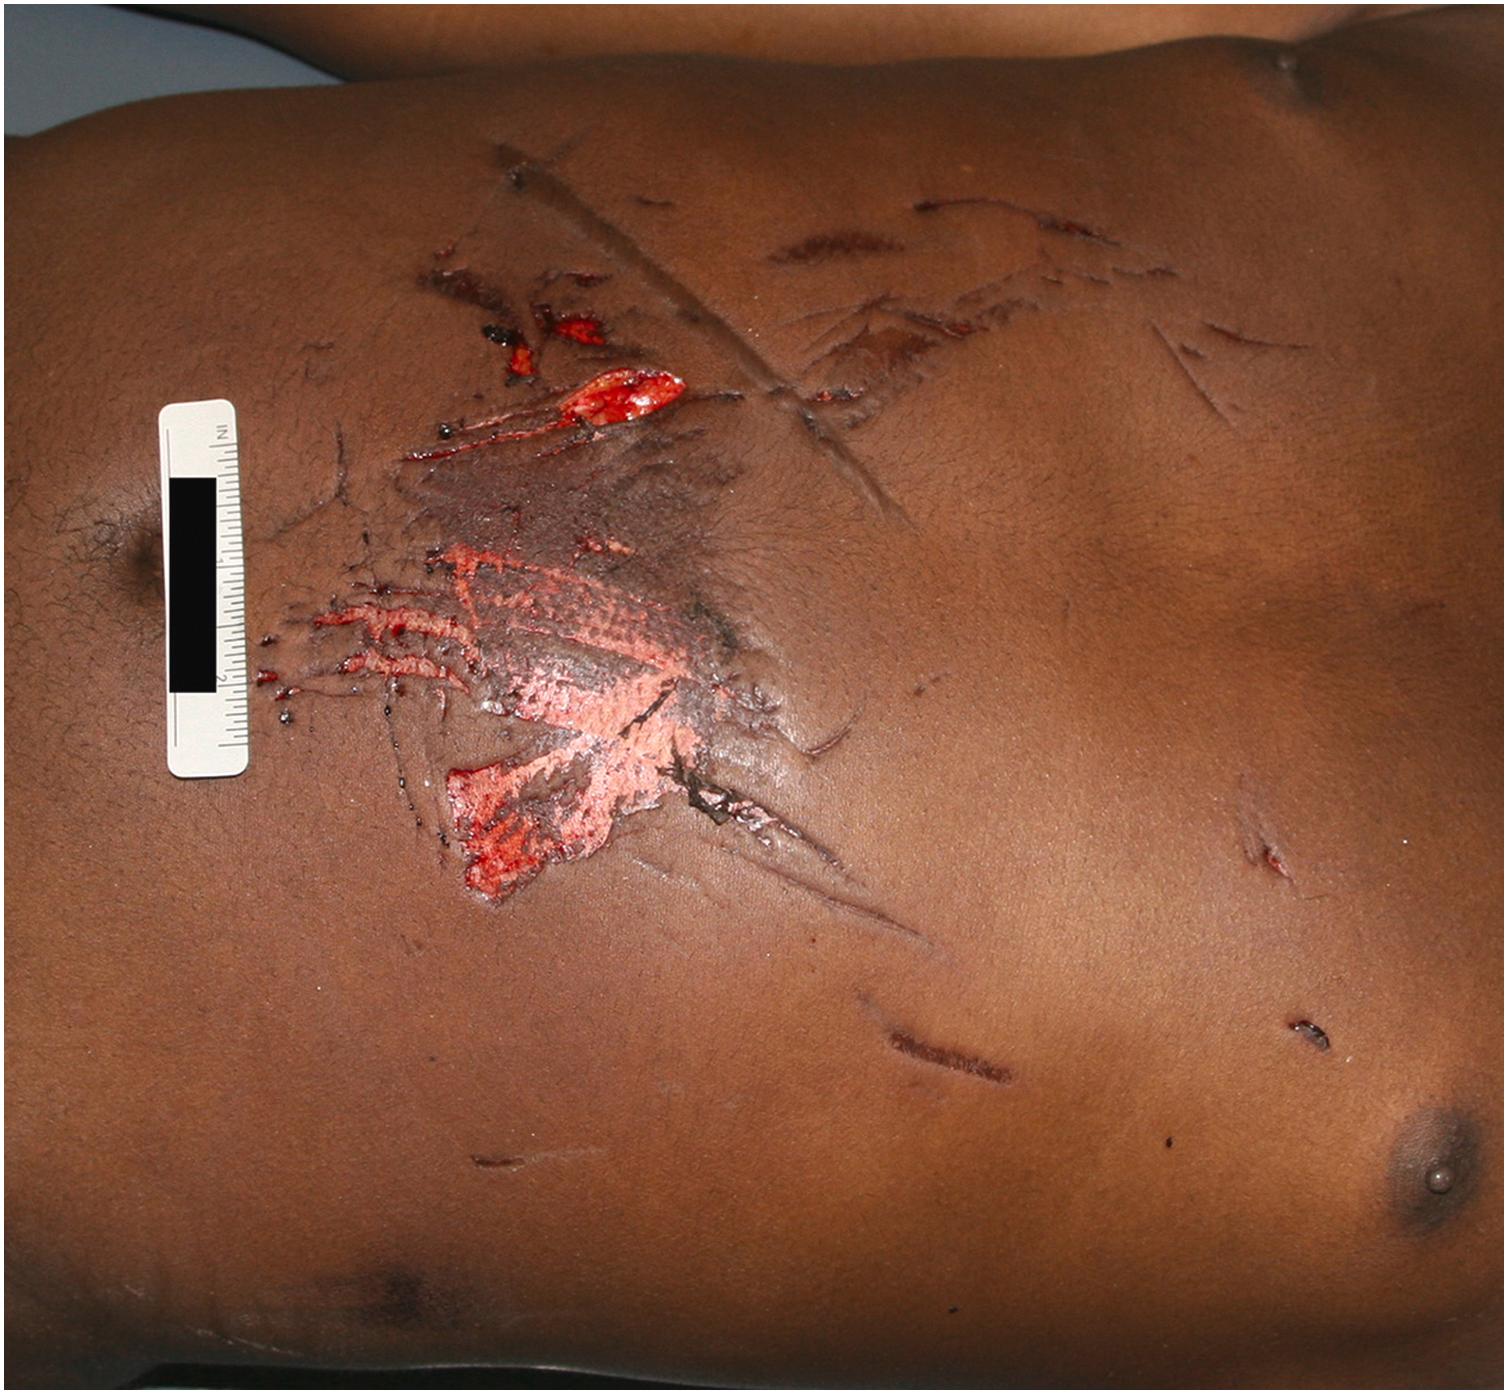 Figure 22.14, This decedent was a nonseat belted driver involved in a head-on motor vehicle collision. External examination showed superficial abrasions of the chest and upper abdomen consistent with an impact with a steering wheel. Internal examination revealed no injuries of the chest wall, heart, lungs, and abdominal organs. Additionally, this decedent had a deep gaping laceration beneath each knee. There was a striking lack of blood at the scene and on the jeans. Histology sections revealed no pathologic changes in the organs. The toxicology evaluation revealed the decedent was intoxicated with alcohol at nearly three times the legal driving limit. Given the scene investigation and the negative findings at autopsy, the cause of death was determined to be commotio cordis.